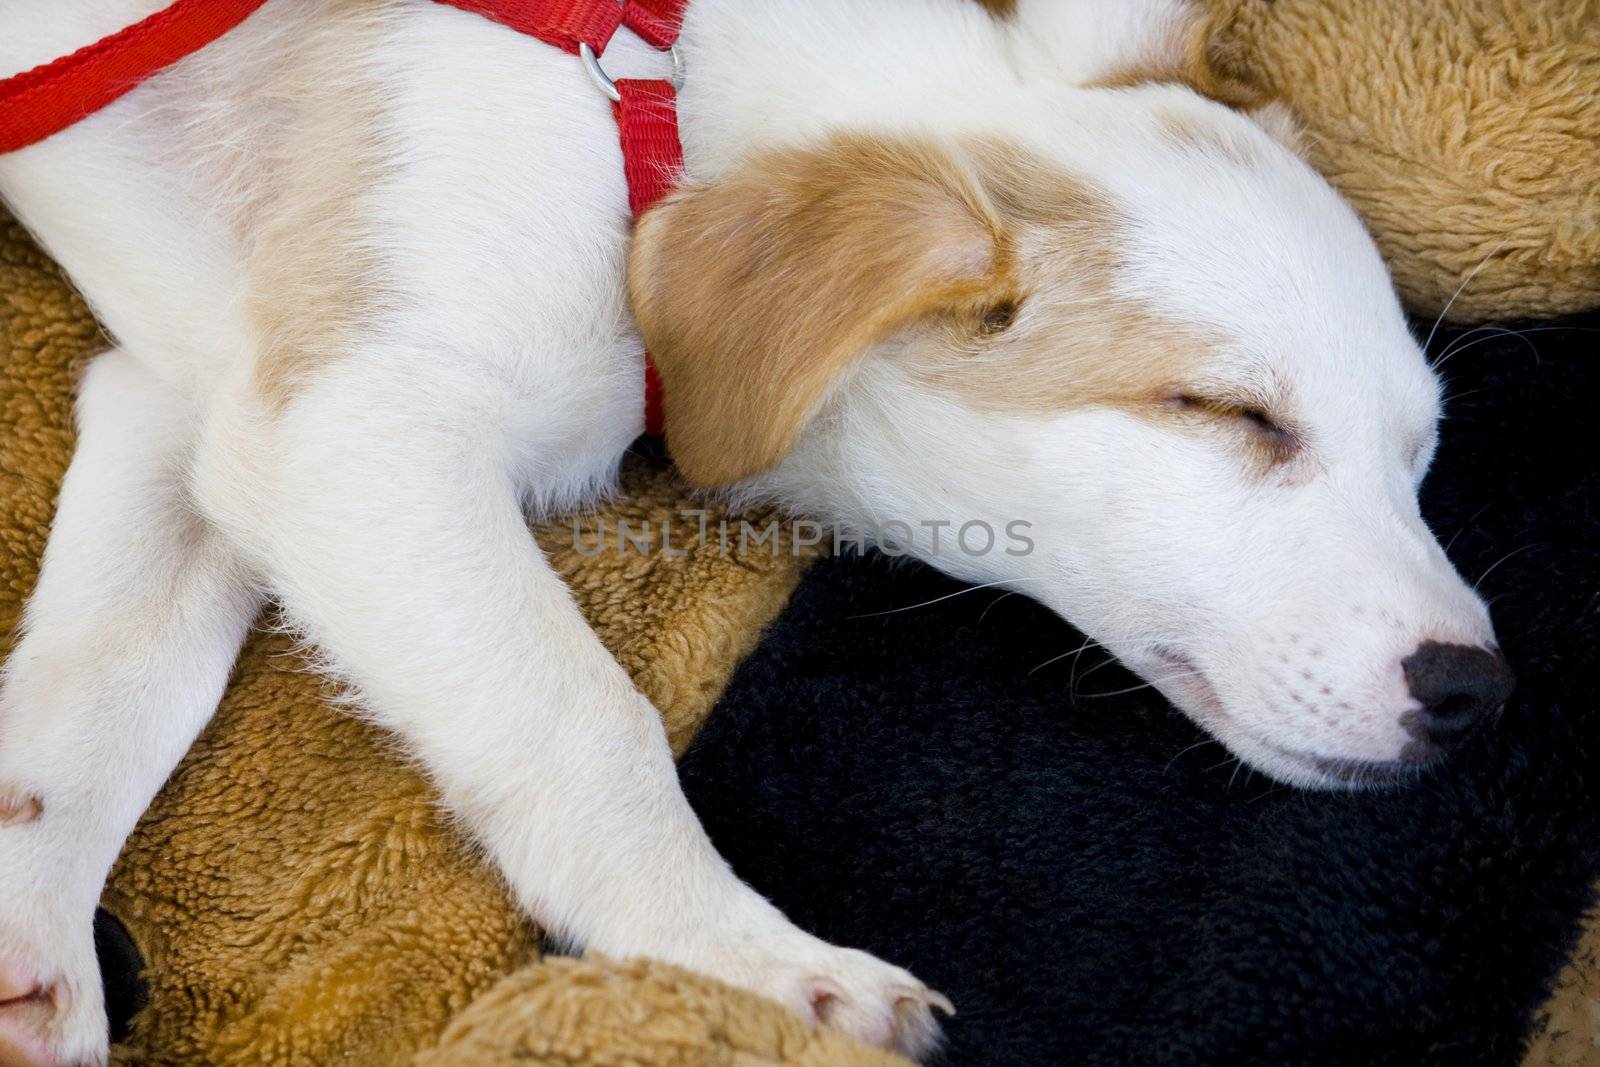 View from above of a white and small domestic dog sleeping on the carpet.